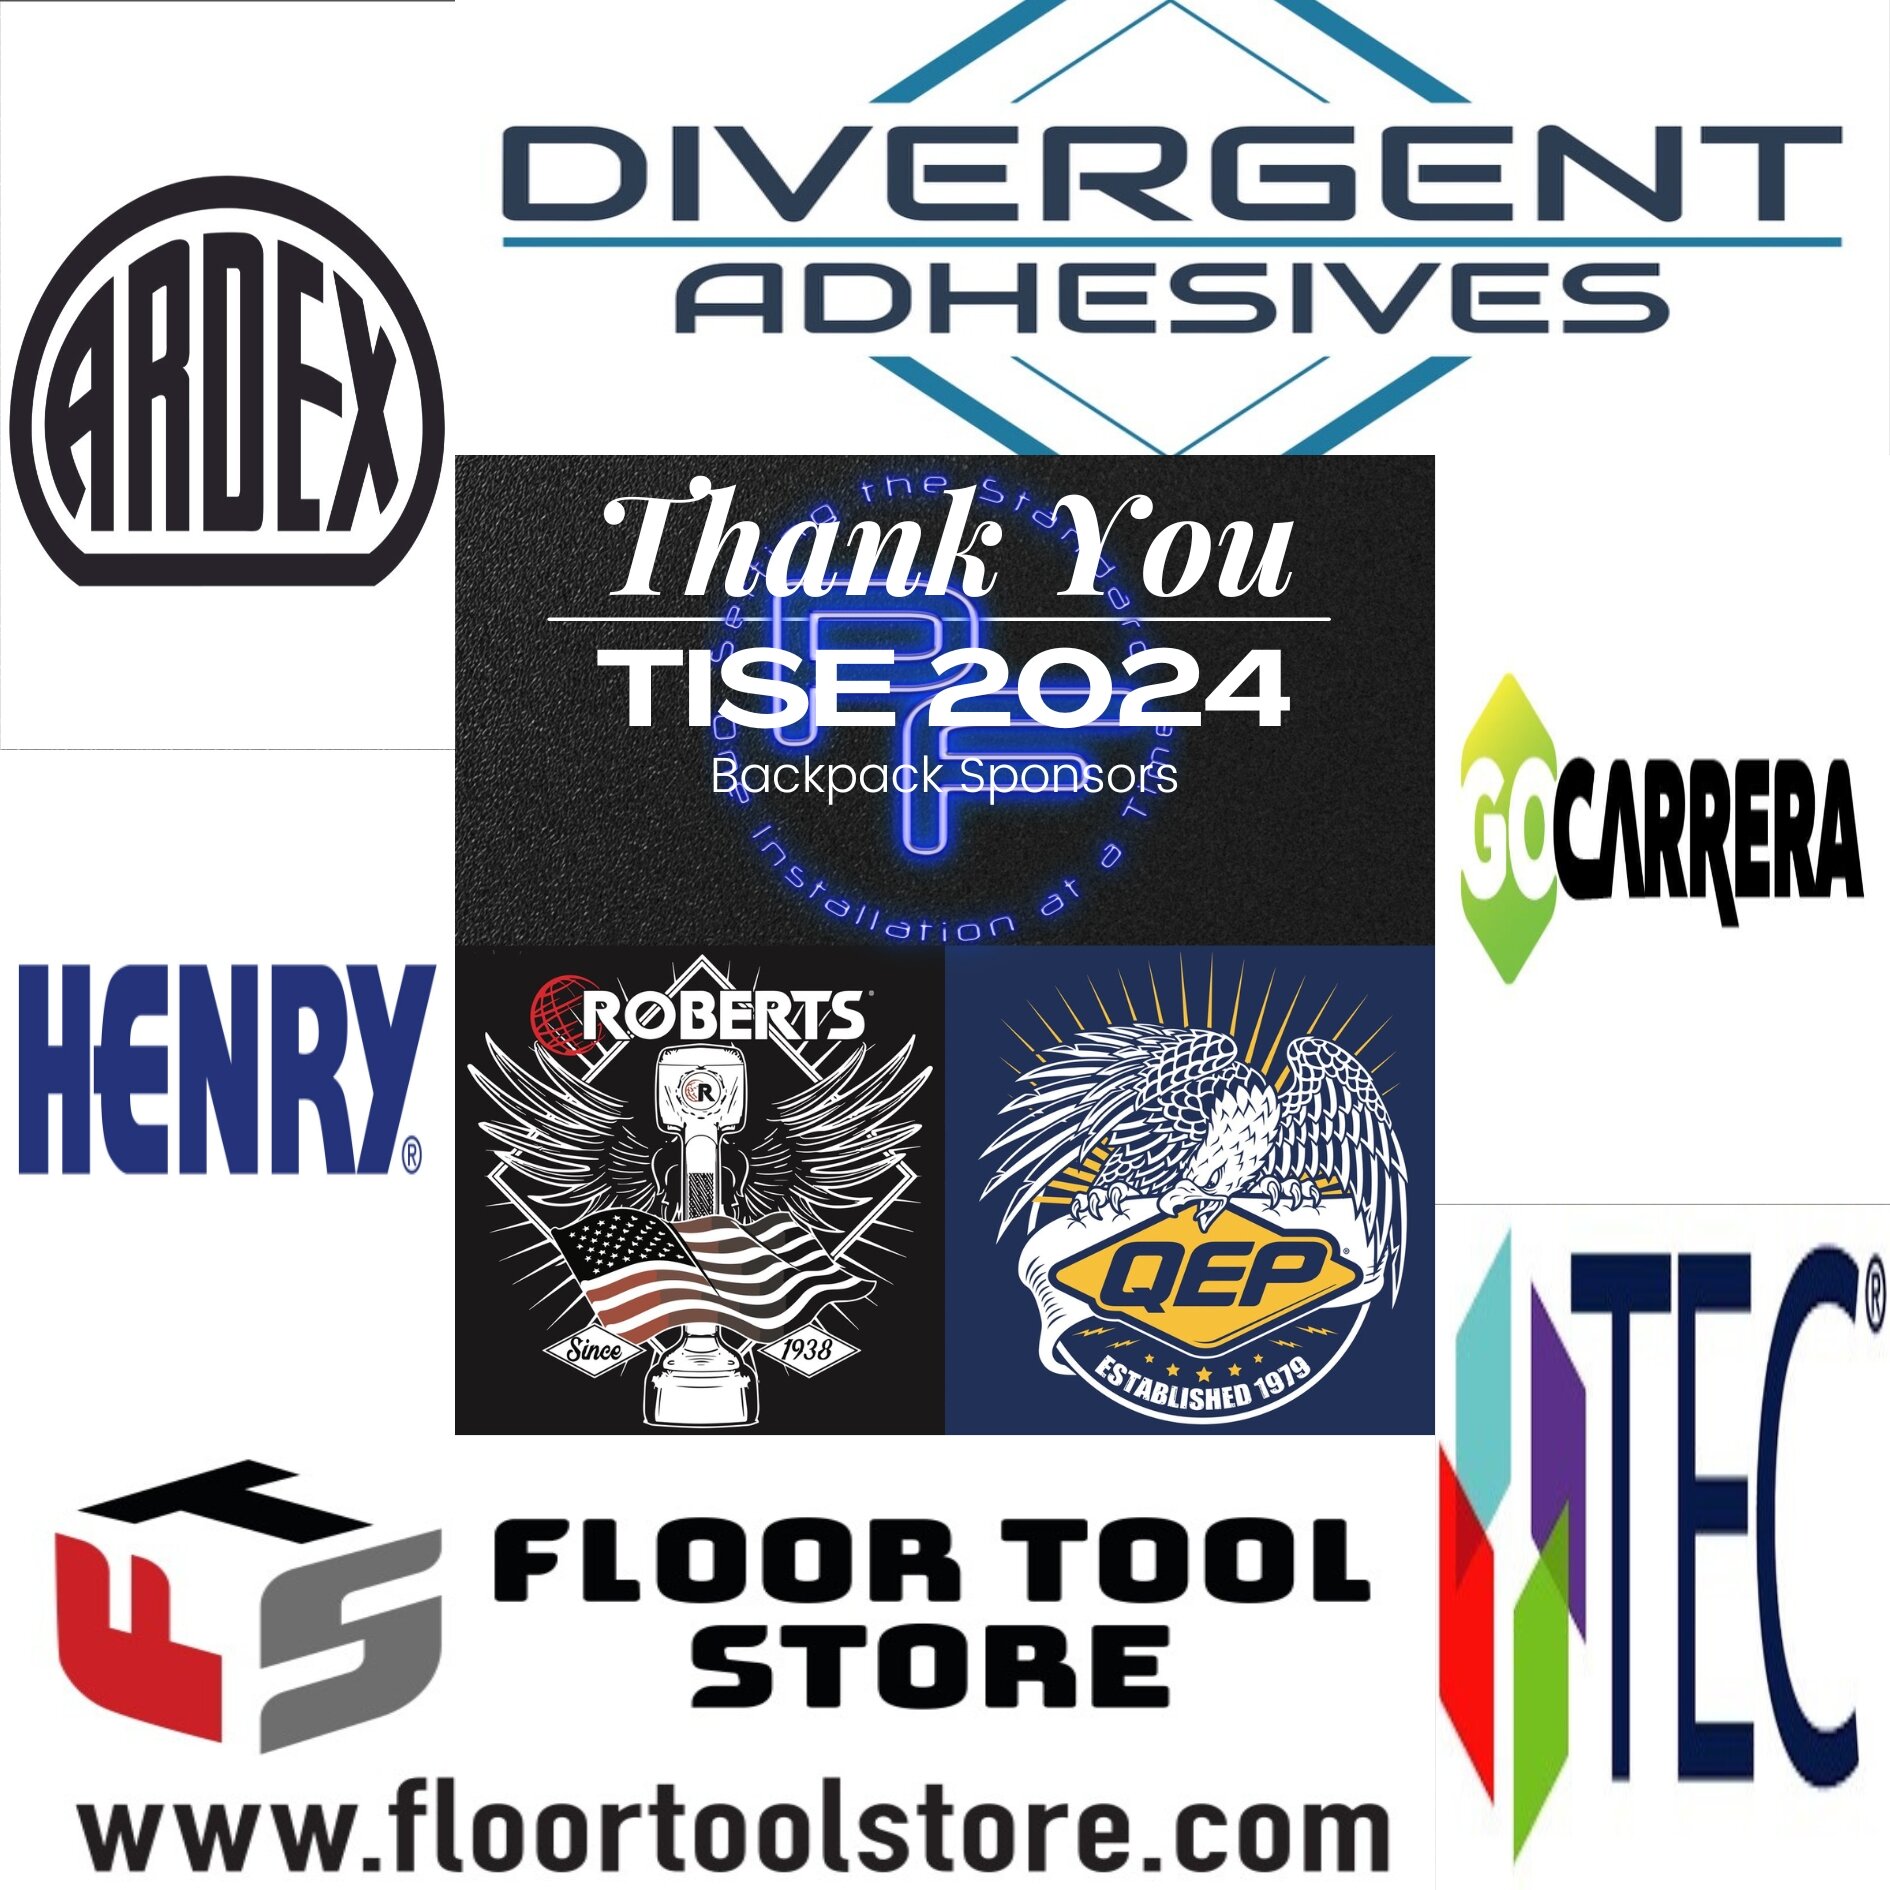 @tiseevents is over and we had a great time! Shout out to our backpack sponsors:
@robertsconsolidated @qeptools  @ardexamericas  Floor Tool Store  @divergentadhesives  @tecinstallationsystems @_gocarrera  @nafct4u 
Check out TISE 24 link in bio for l